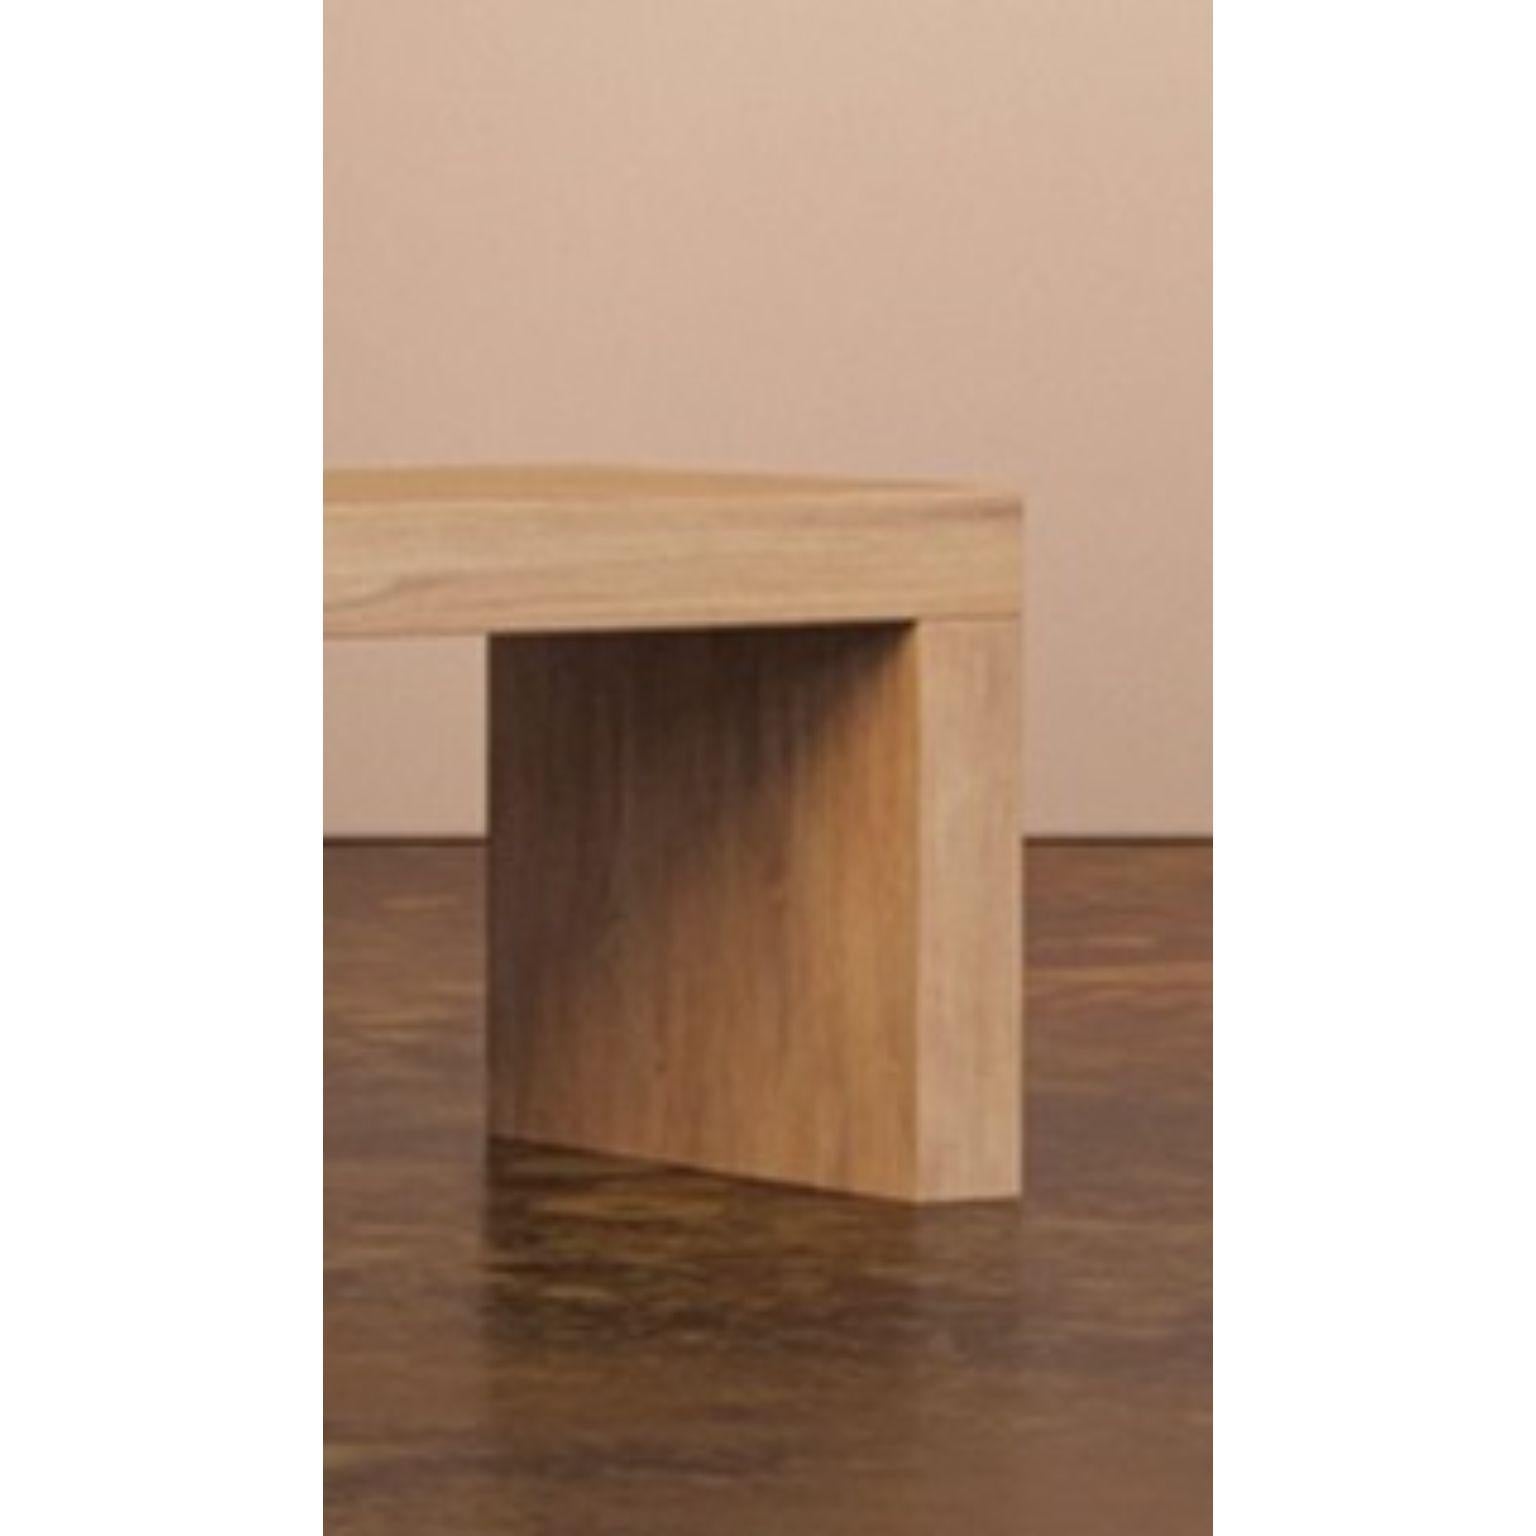 Other Interlove Coffee Table by Bea Interiors For Sale